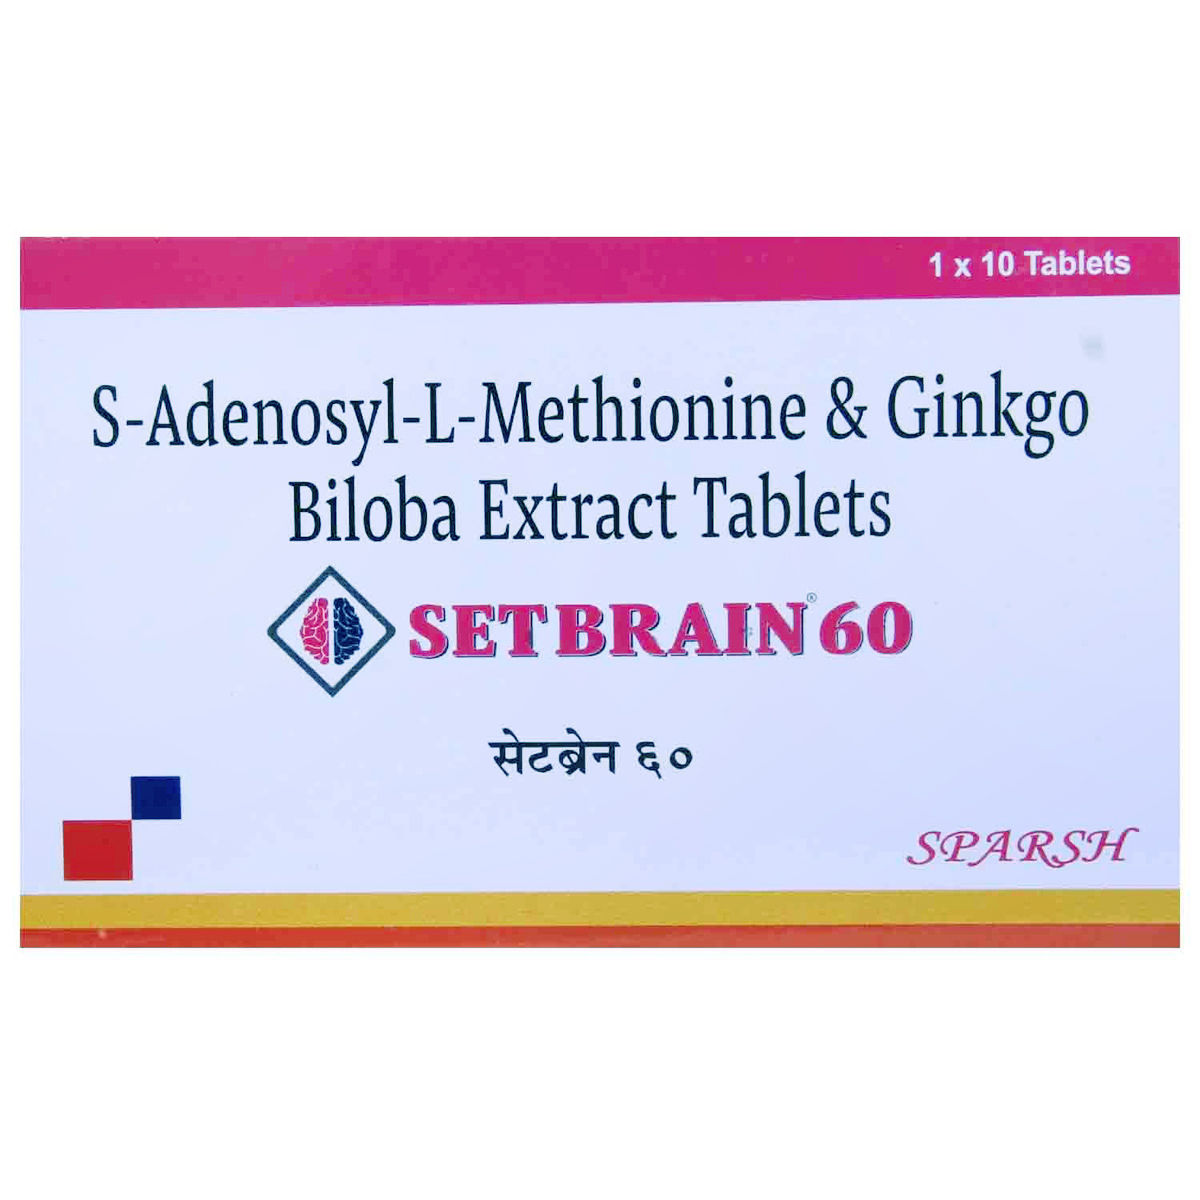 Setbrain 60 Tablet 10's Price, Uses, Side Effects, Composition Apollo  Pharmacy